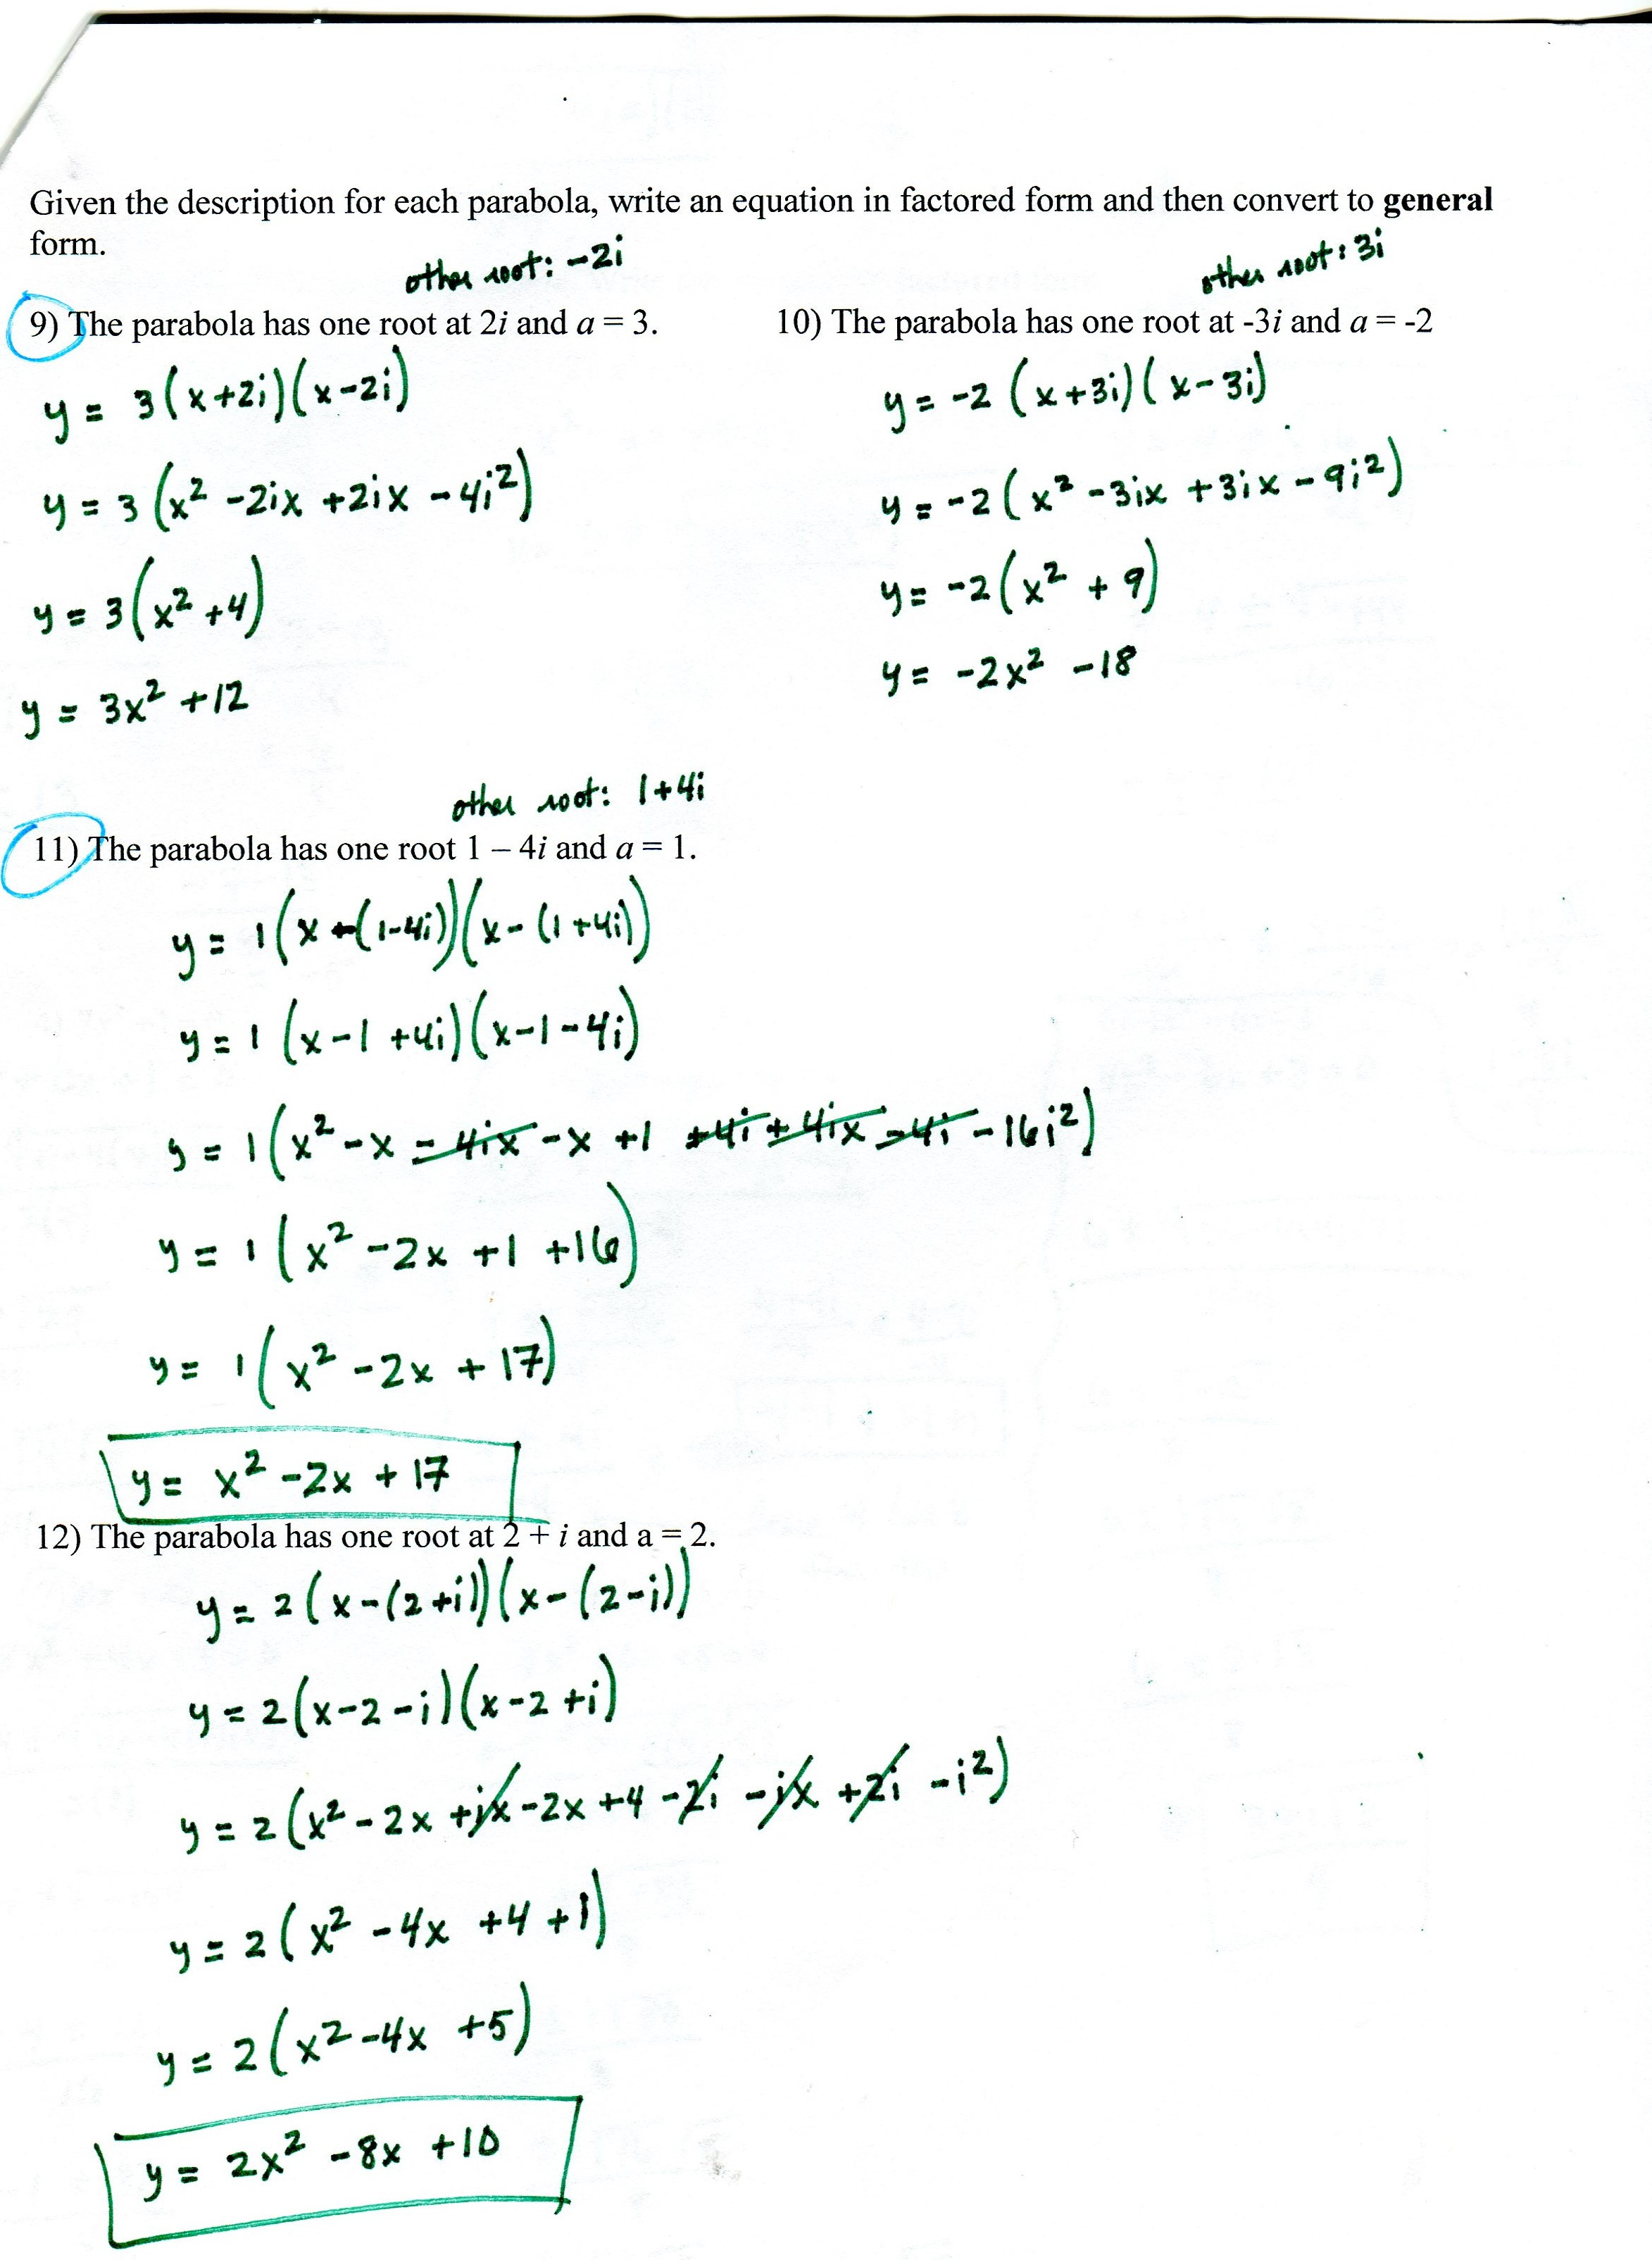 logarithms-and-logarithmic-functions-worksheet-free-download-goodimg-co